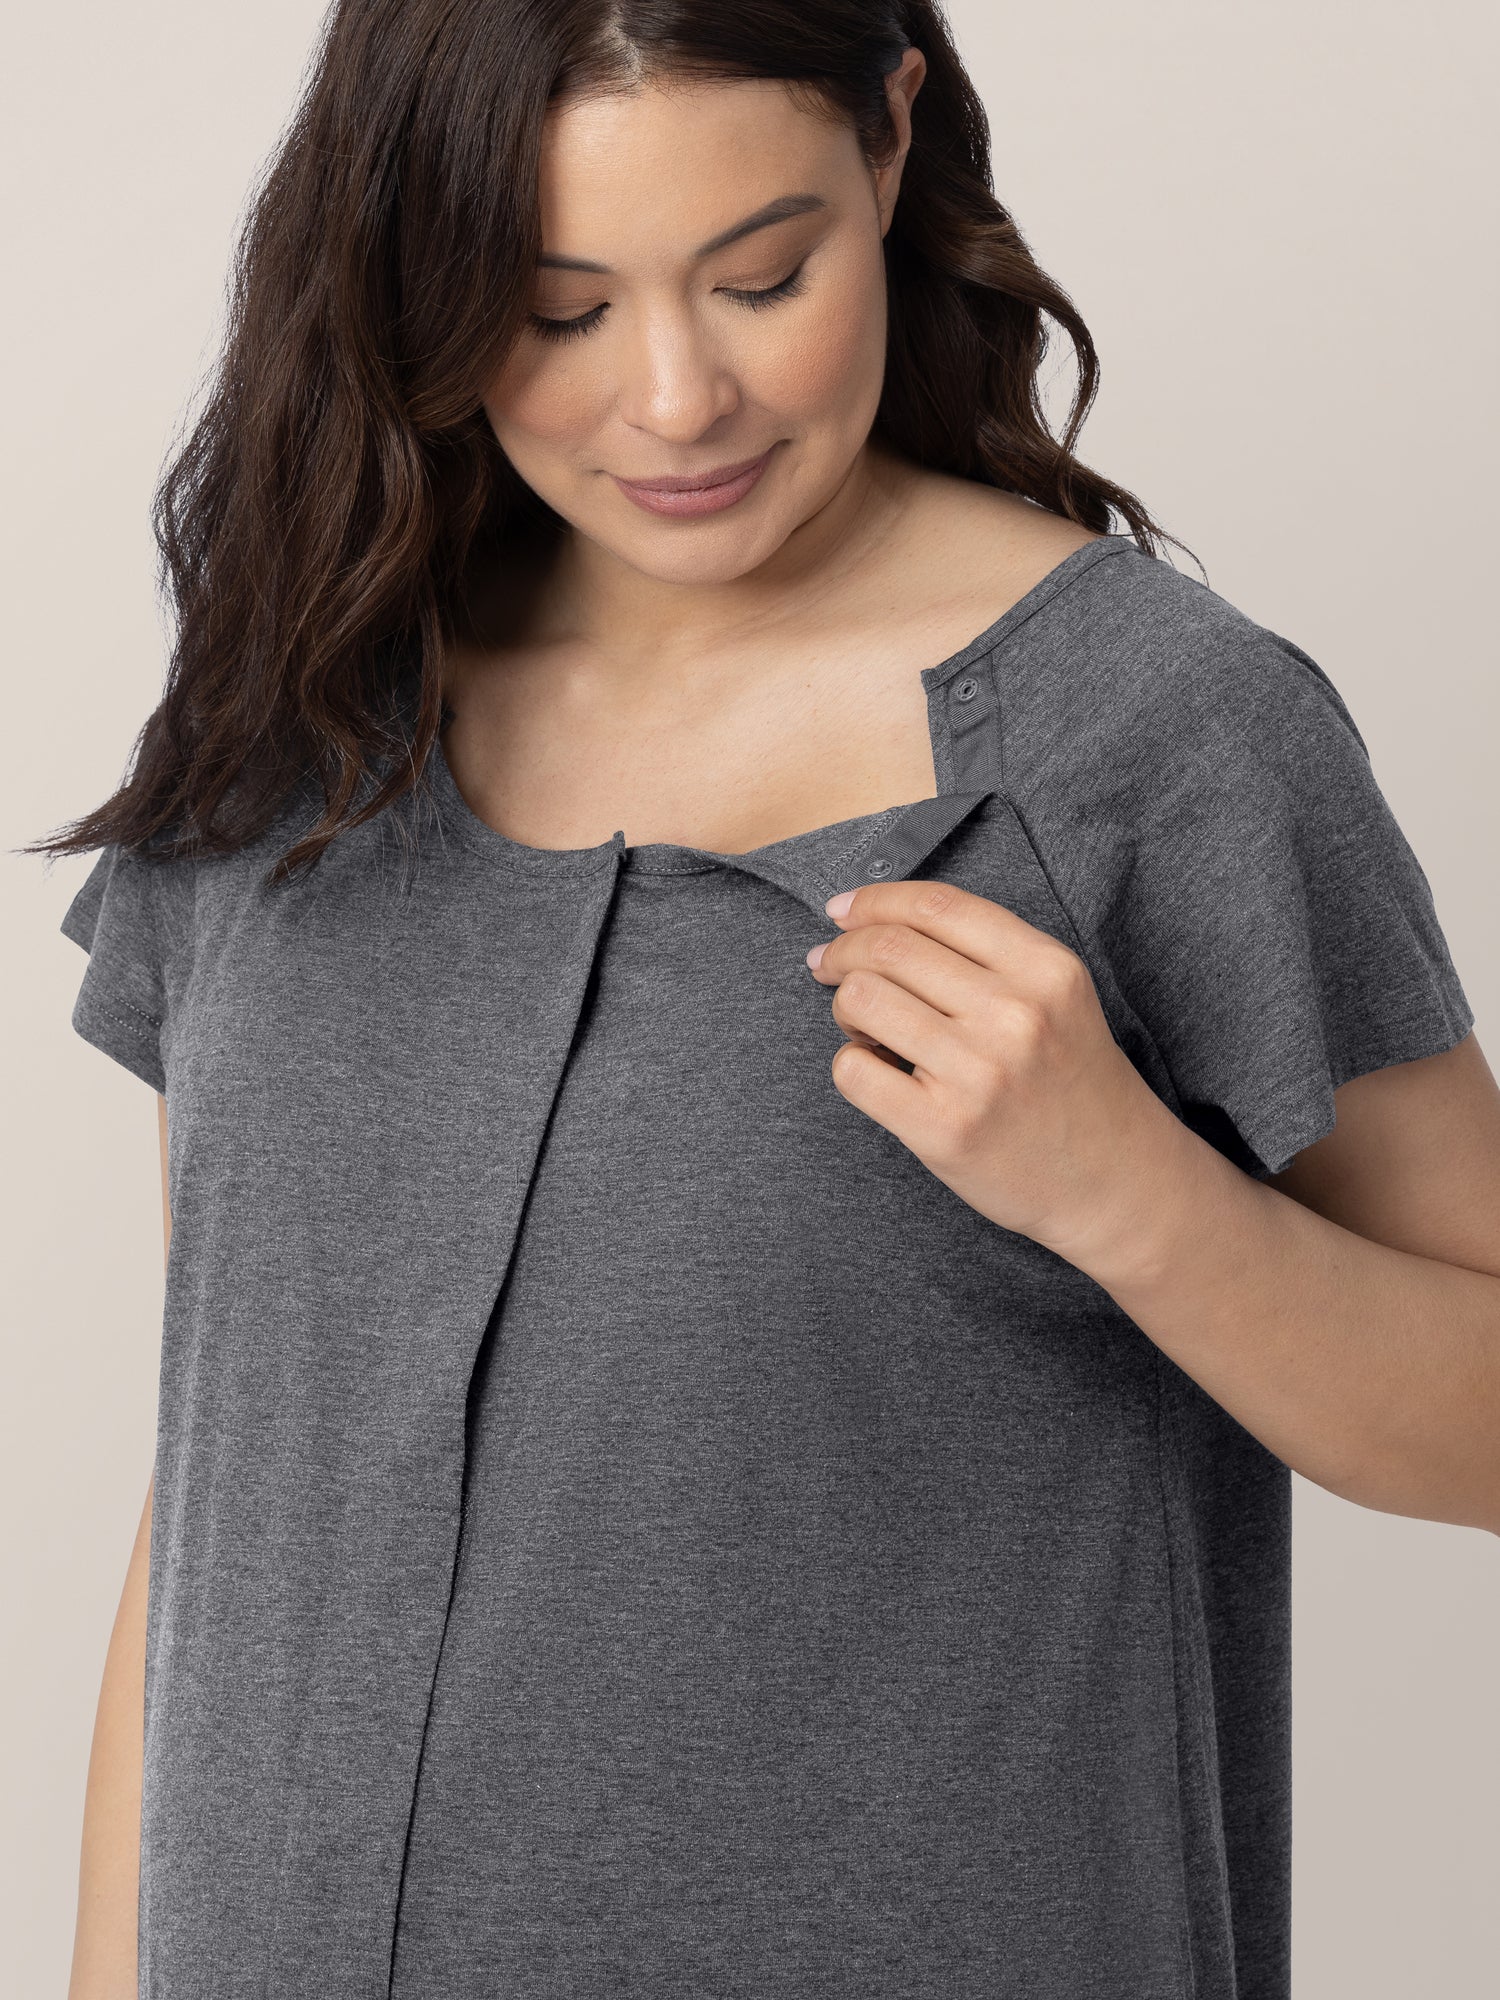 Pregnant model showing the easy clip down nursing and labor access on the Universal Labor & Delivery Gown in Grey Heather